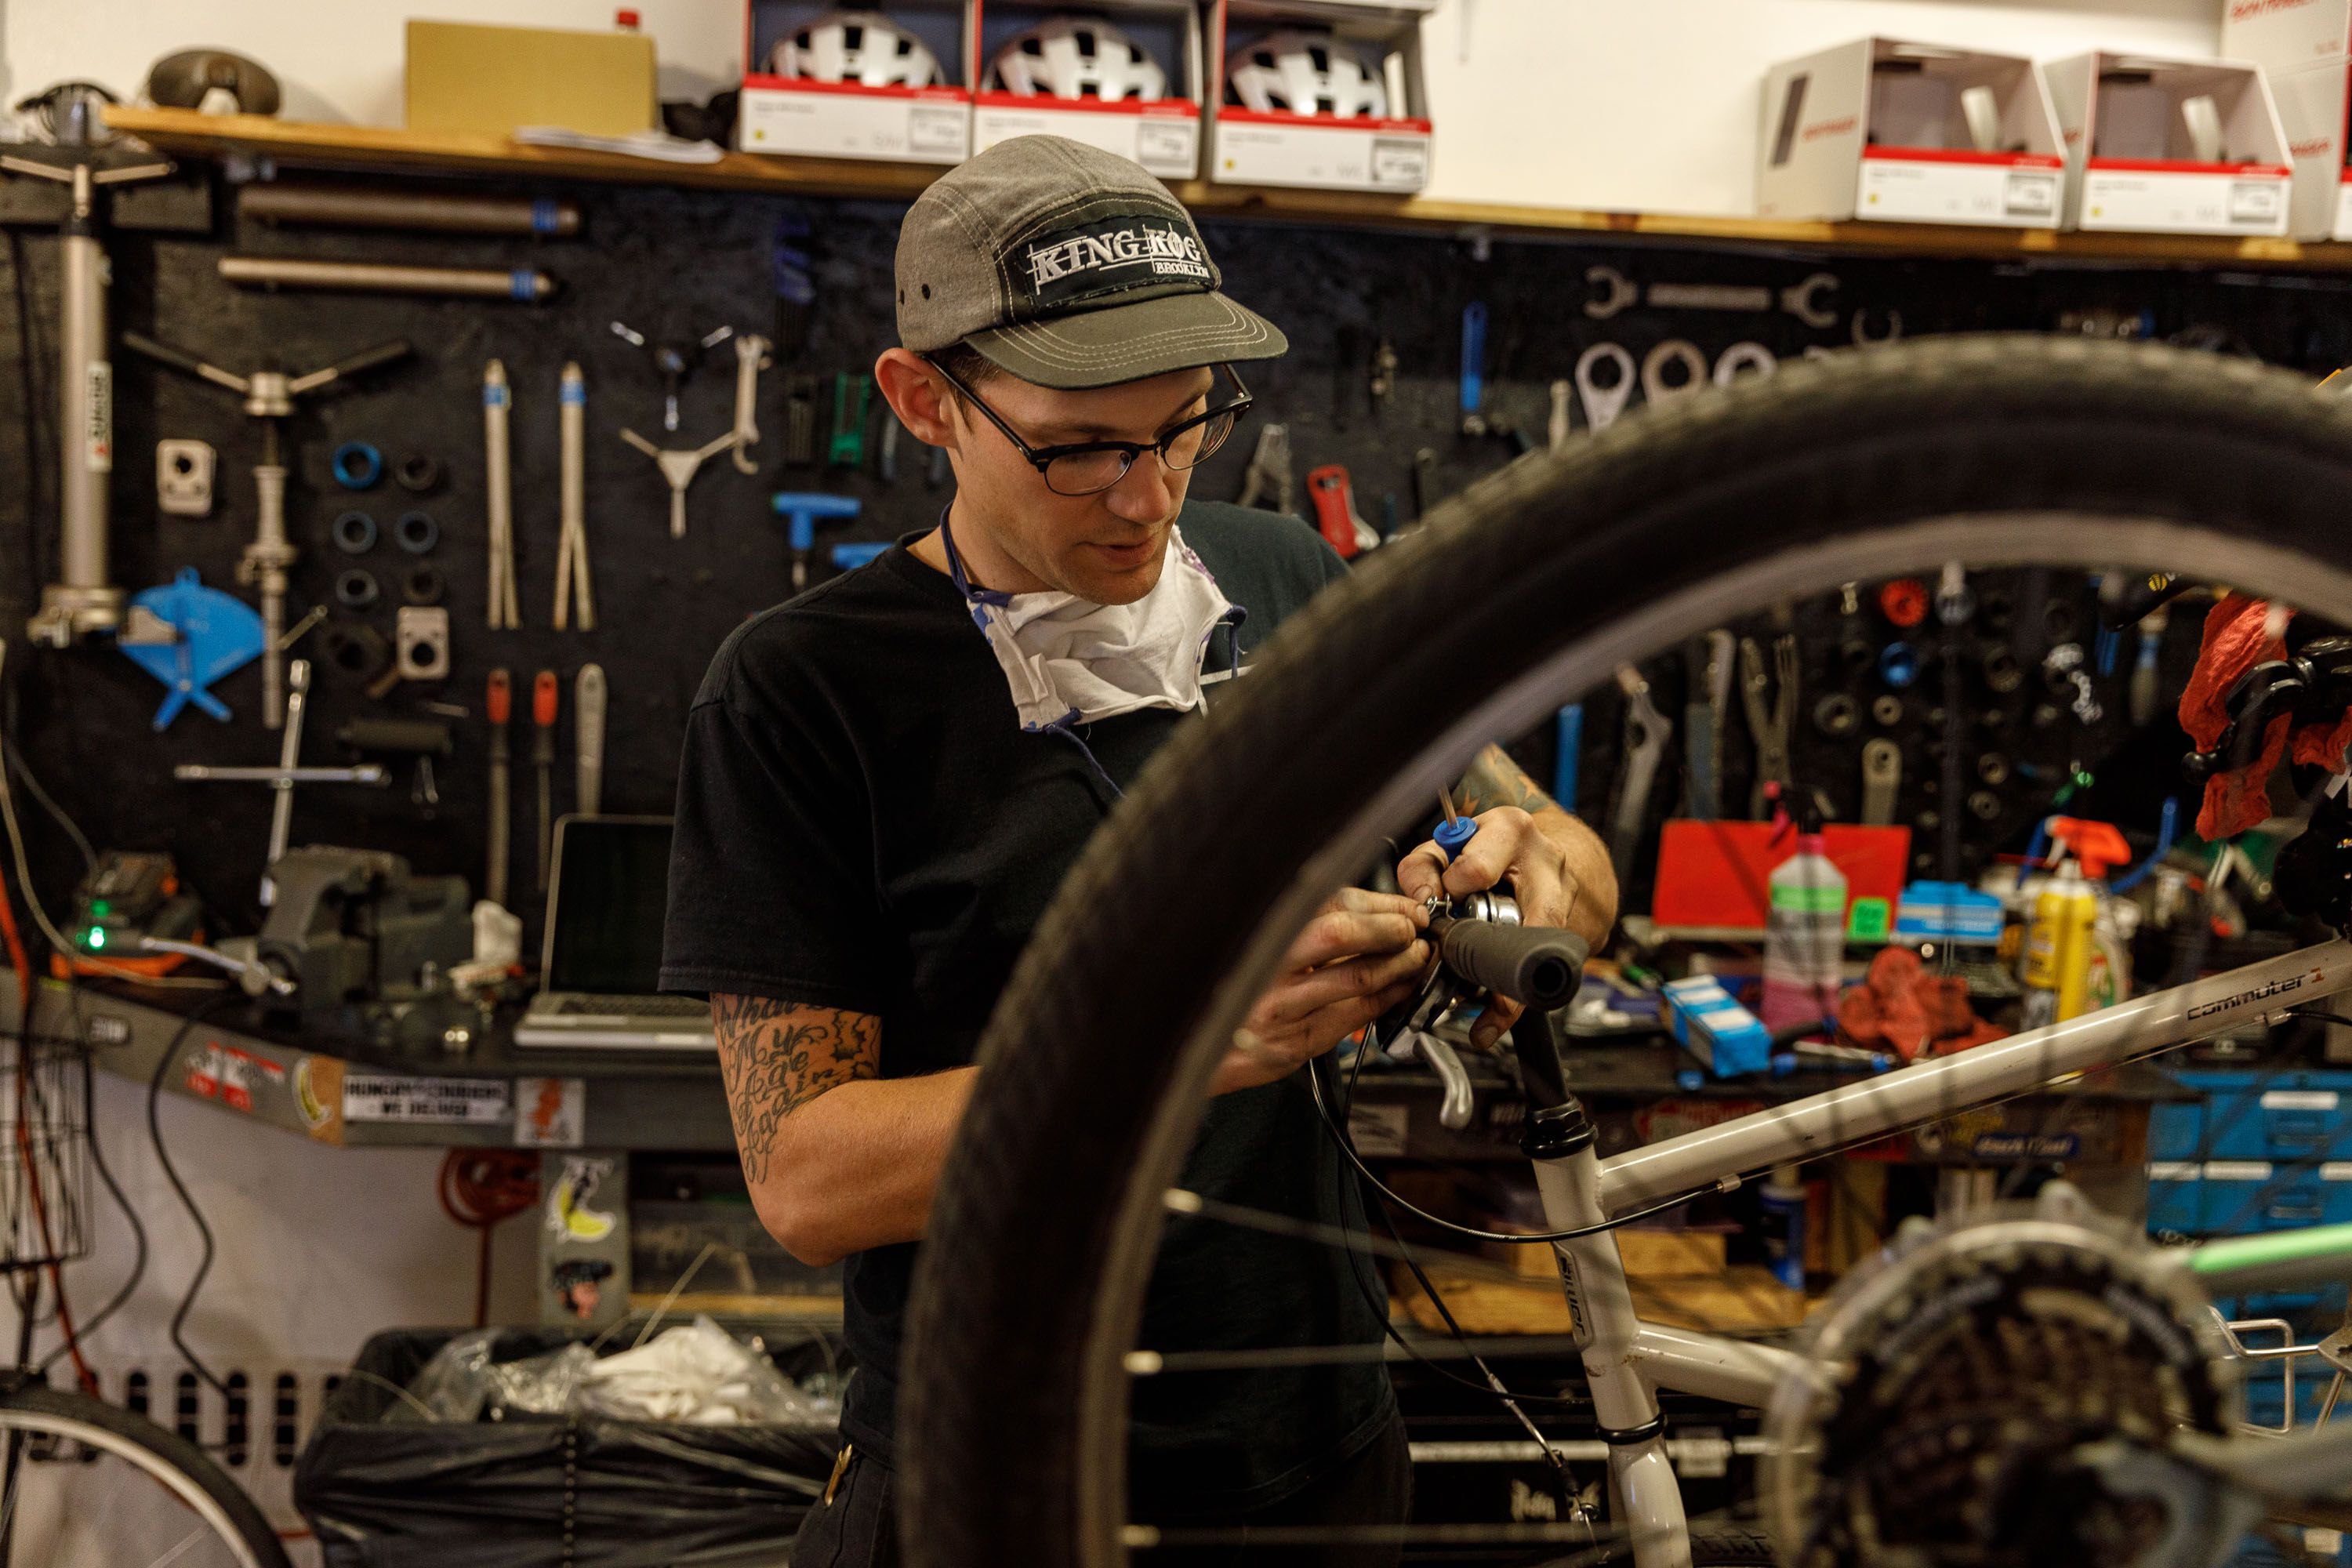 This NYC Bike Shop is Staying Open 